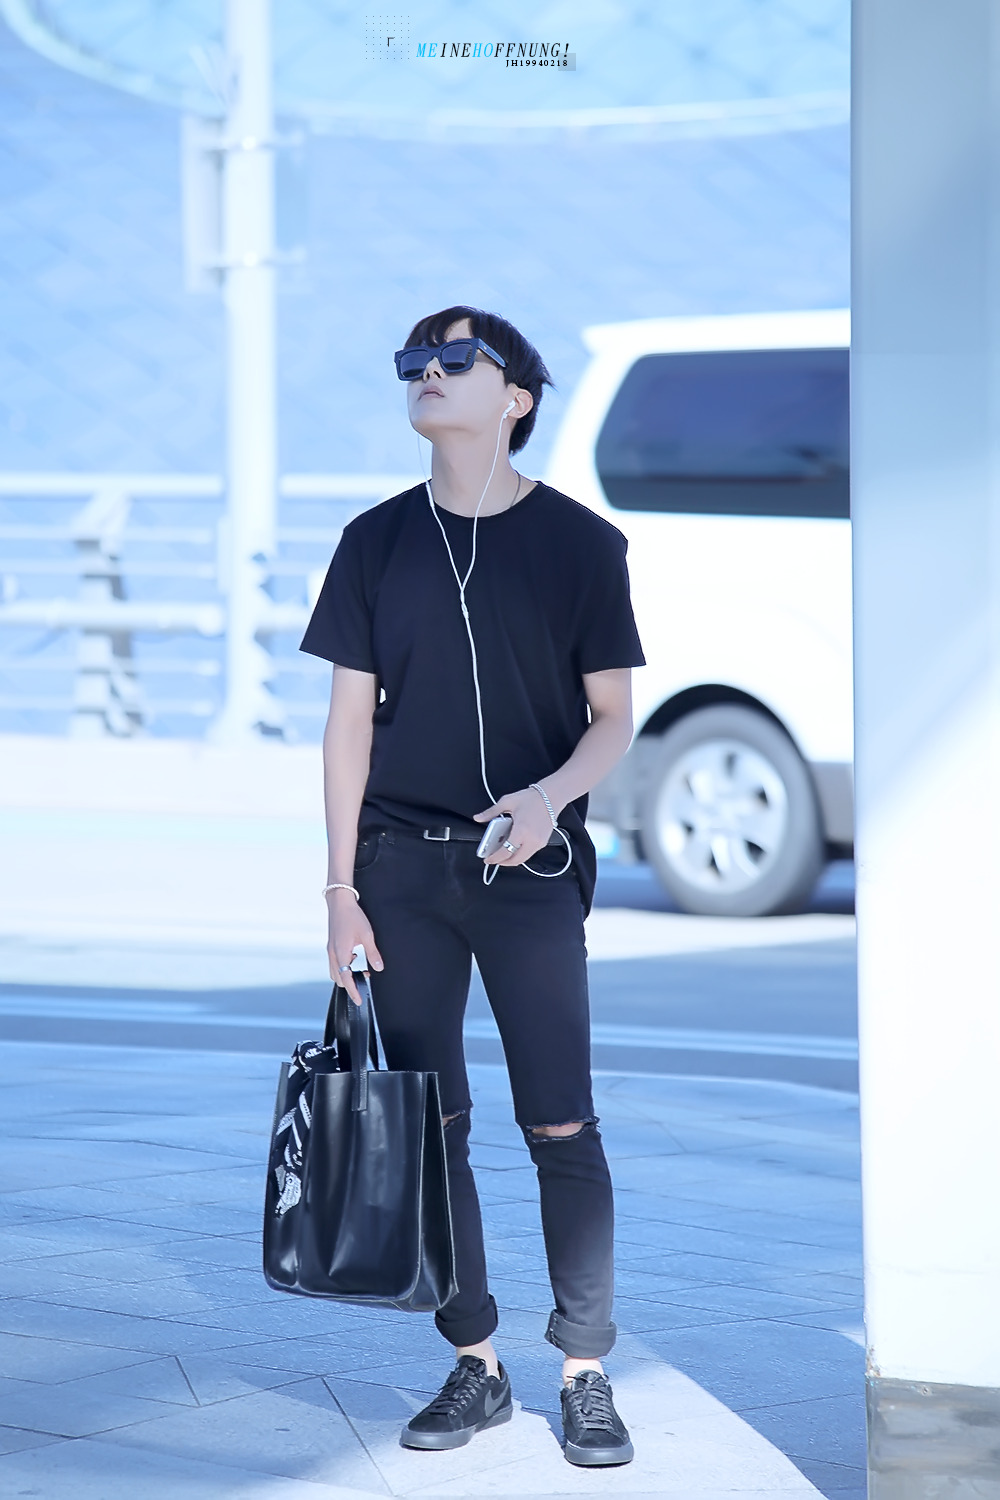 Bangtan Style⁷ (slow) on X: MORE OF HOSEOK'S ICONIC BAGS